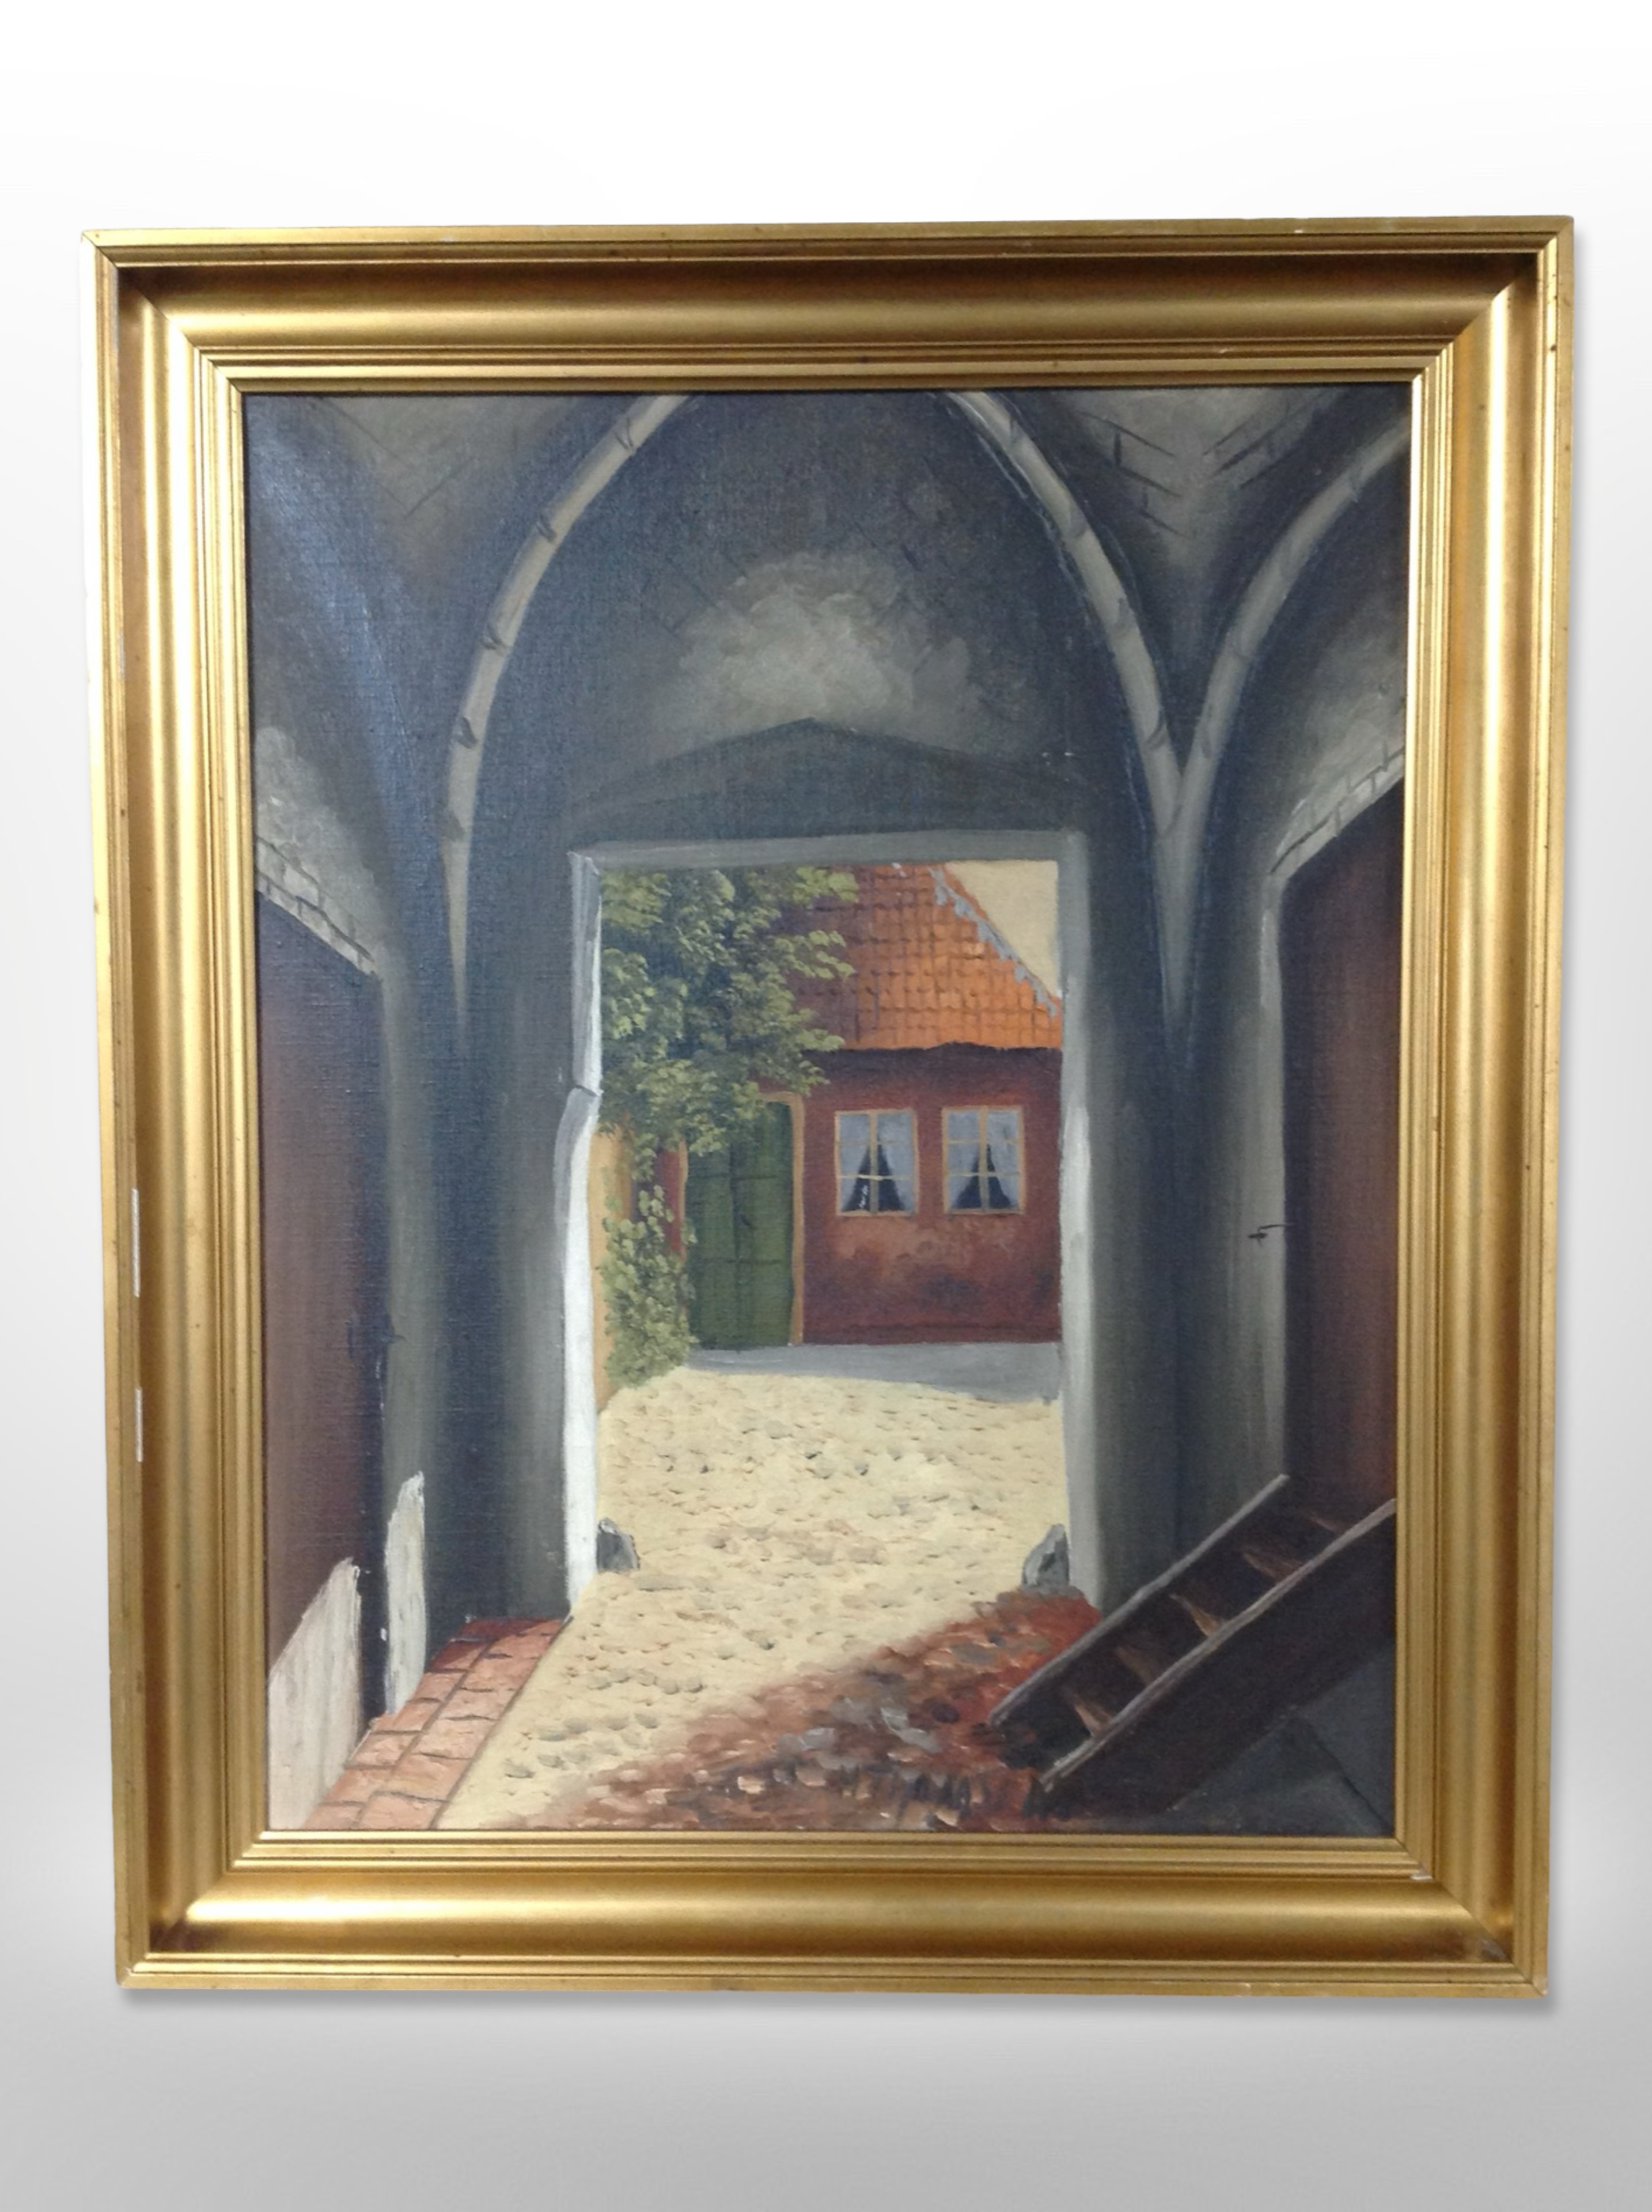 Continental school : View through an archway with cobbled pavement, oil on canvas, 58cm x 46cm.